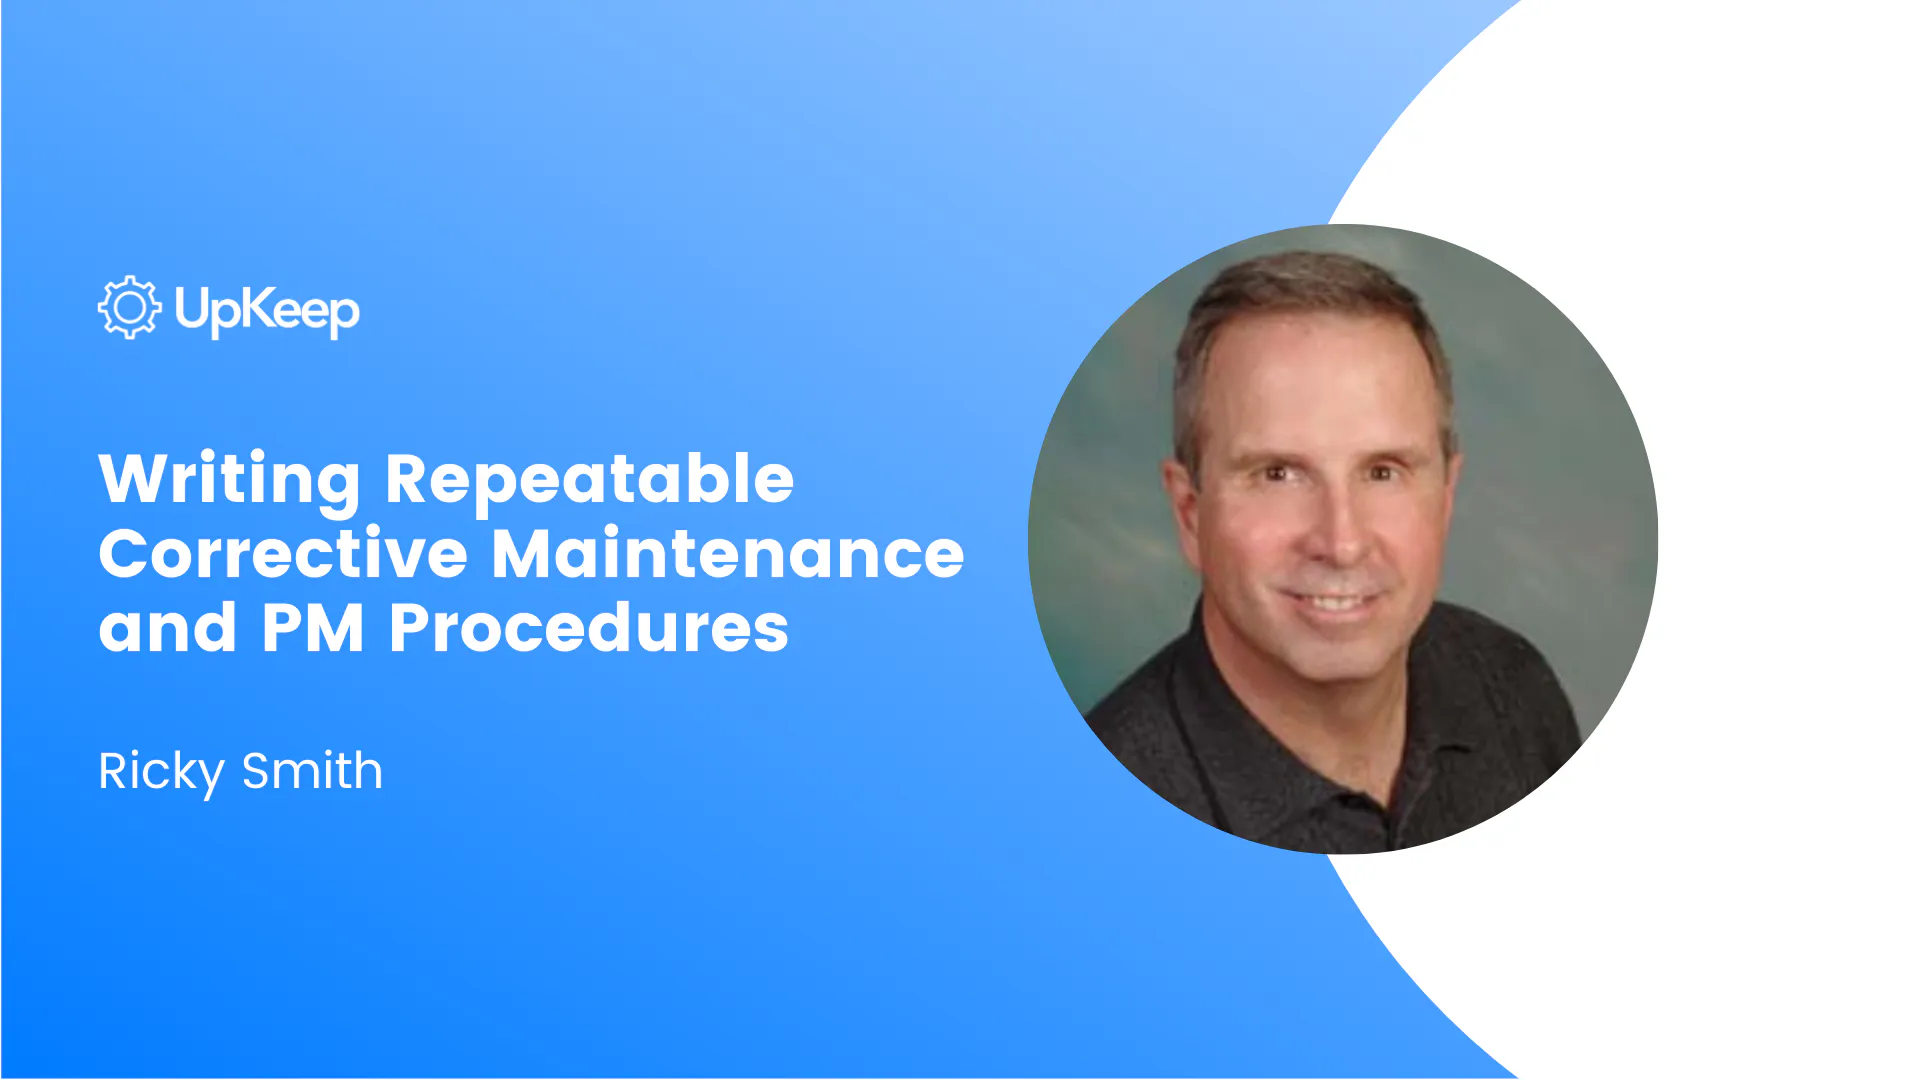 Writing Repeatable Corrective Maintenance and PM Procedures